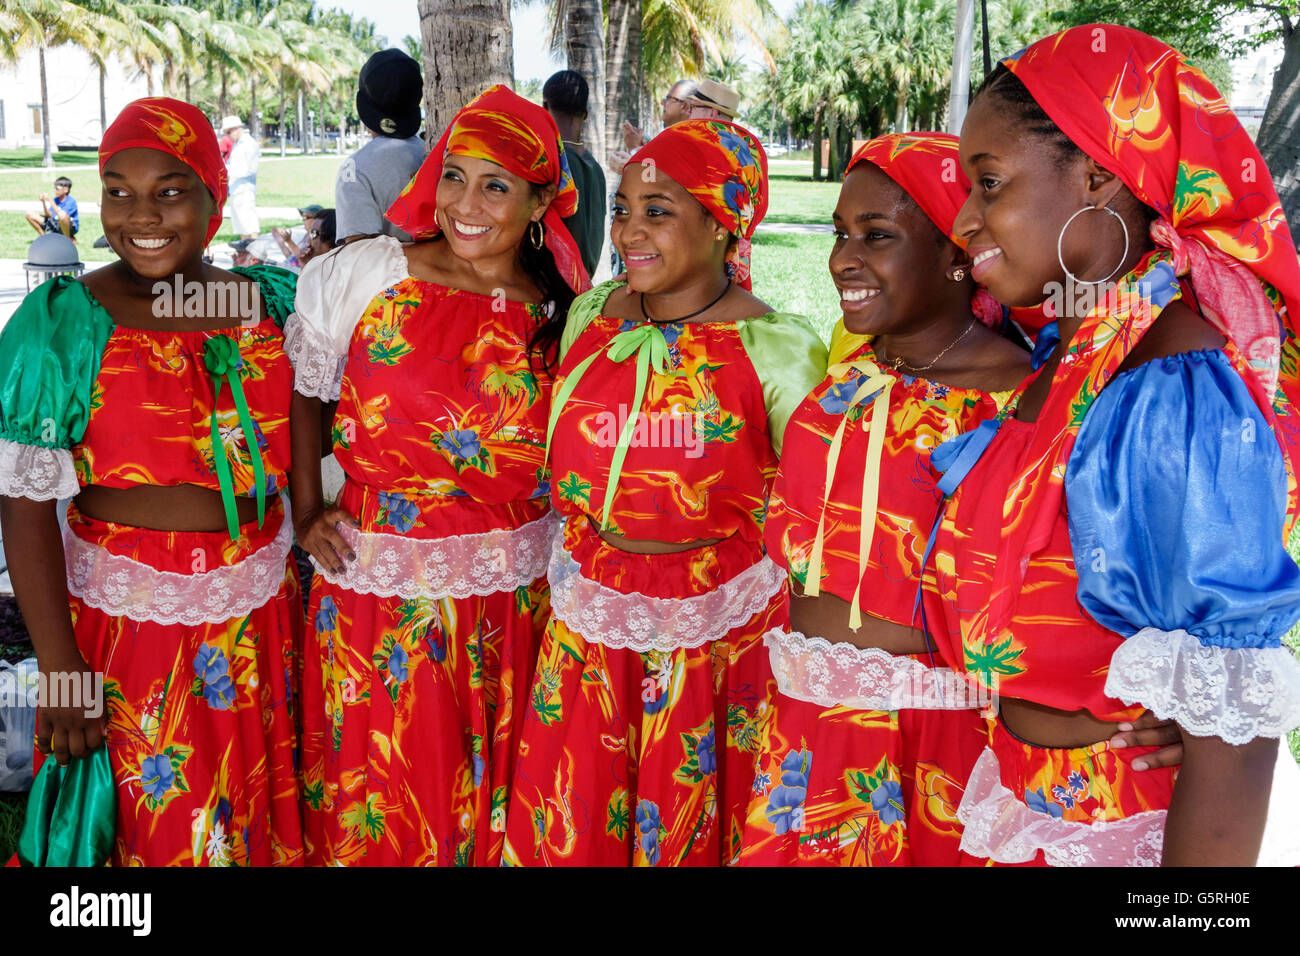 traditional haitian costumes